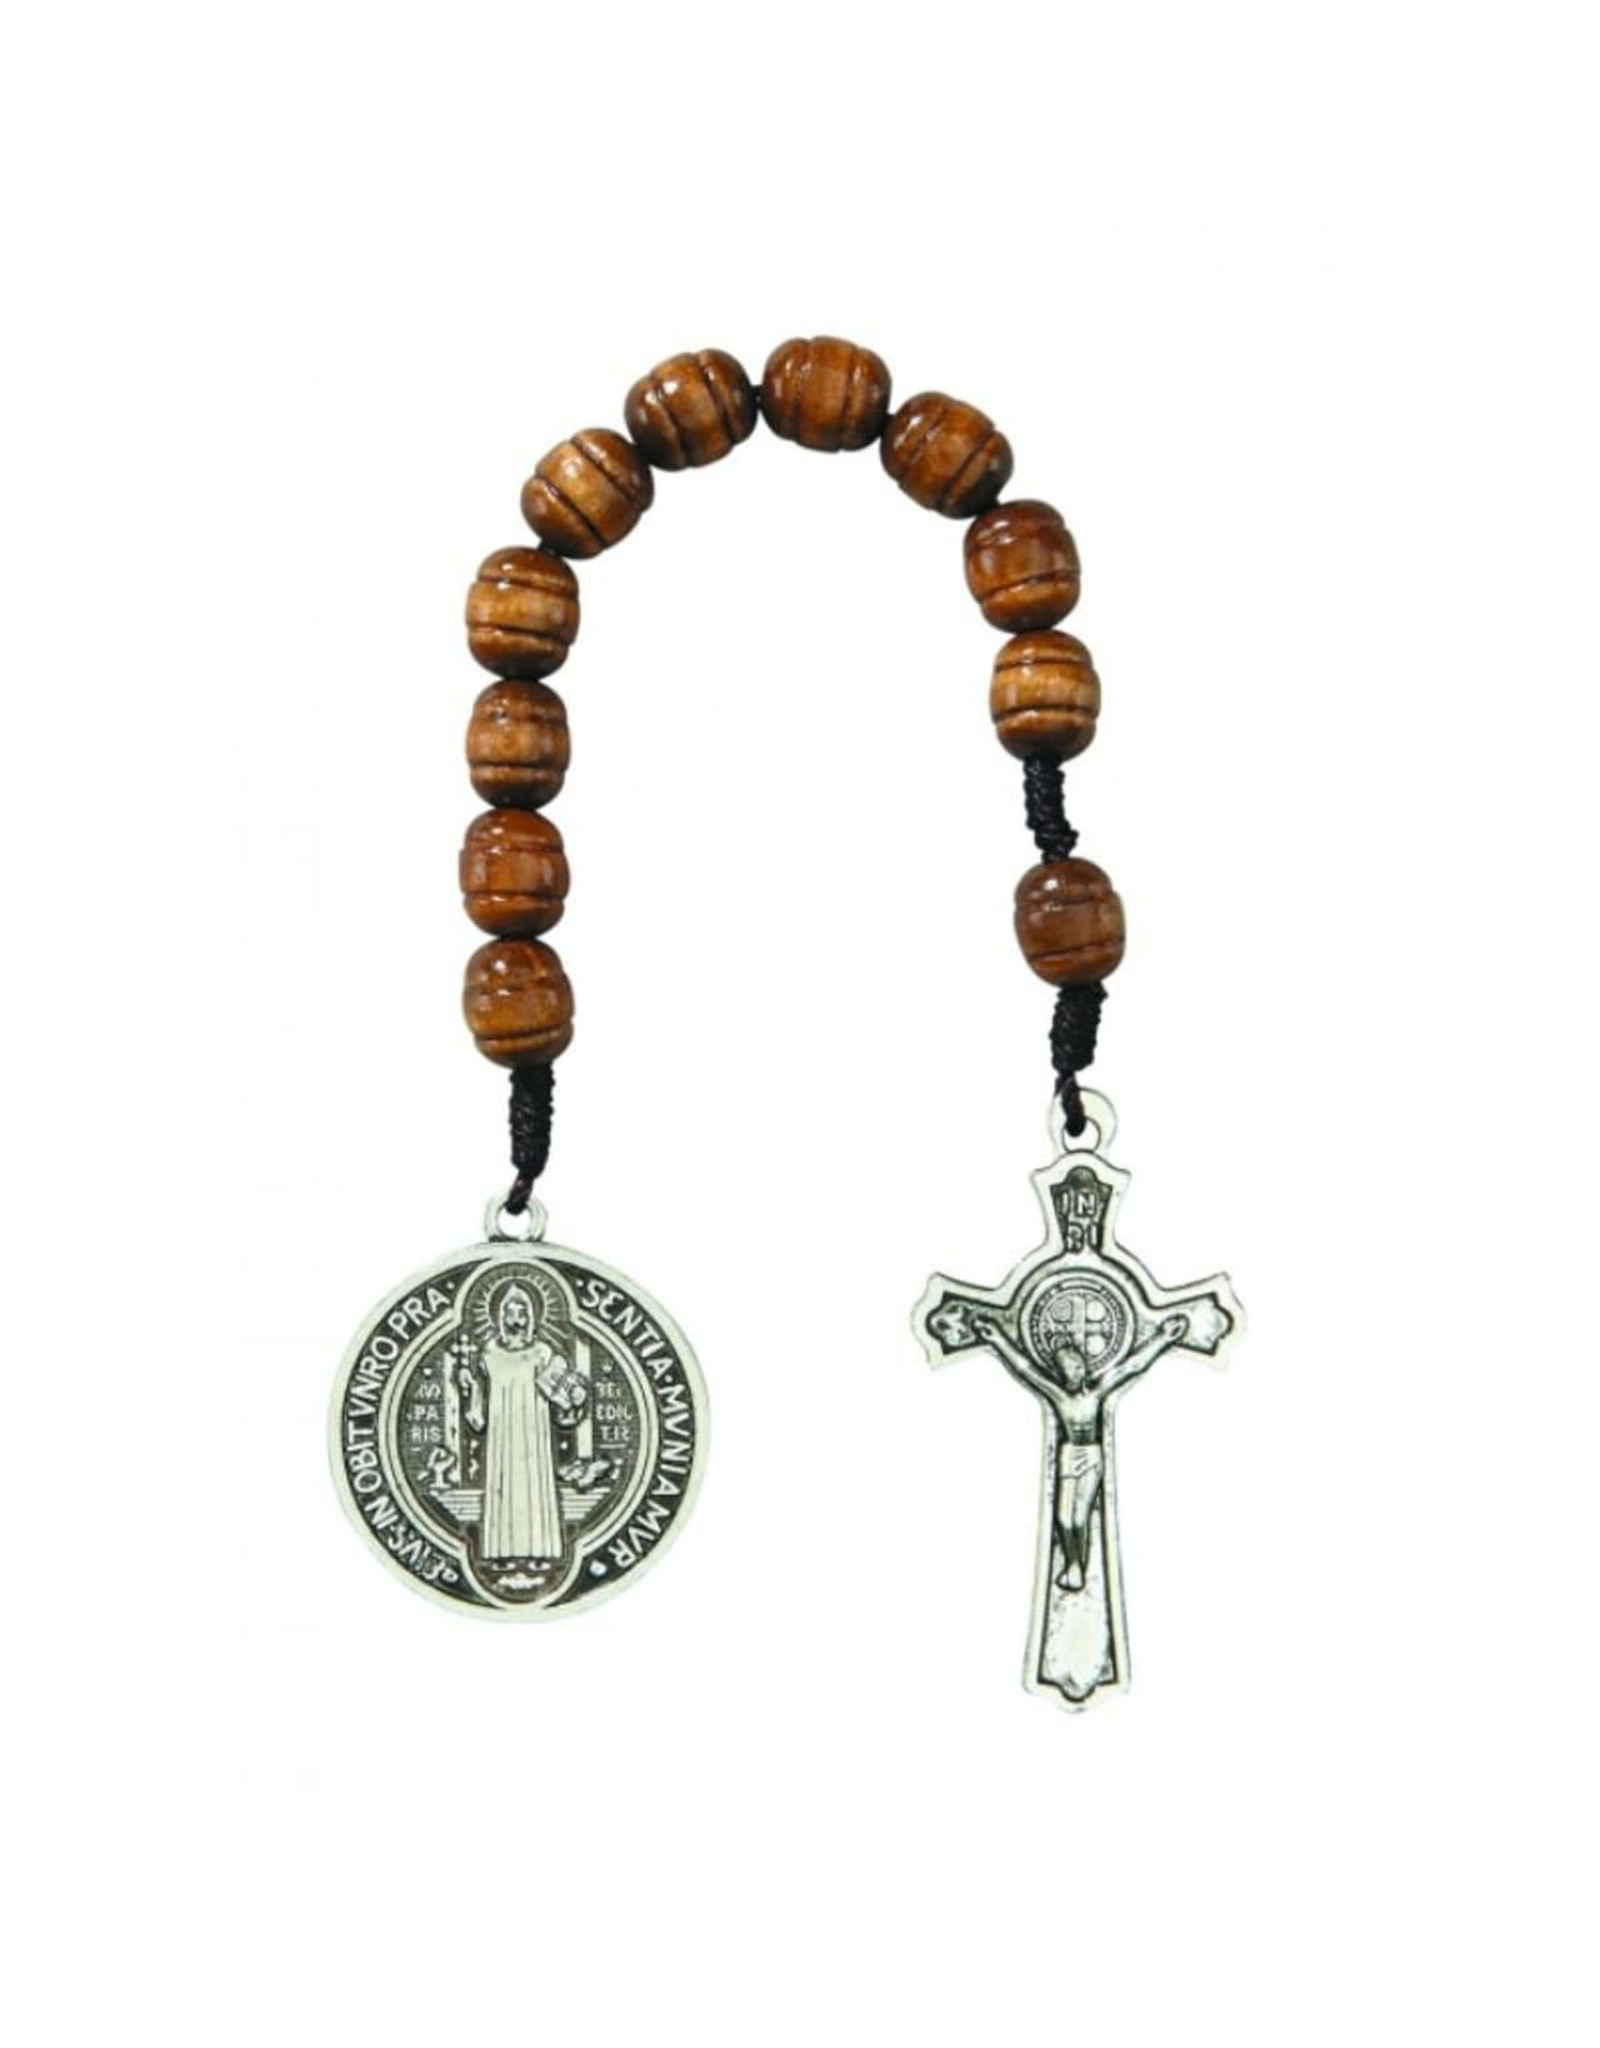 CBC - A St. Benedict Pocket Rosary